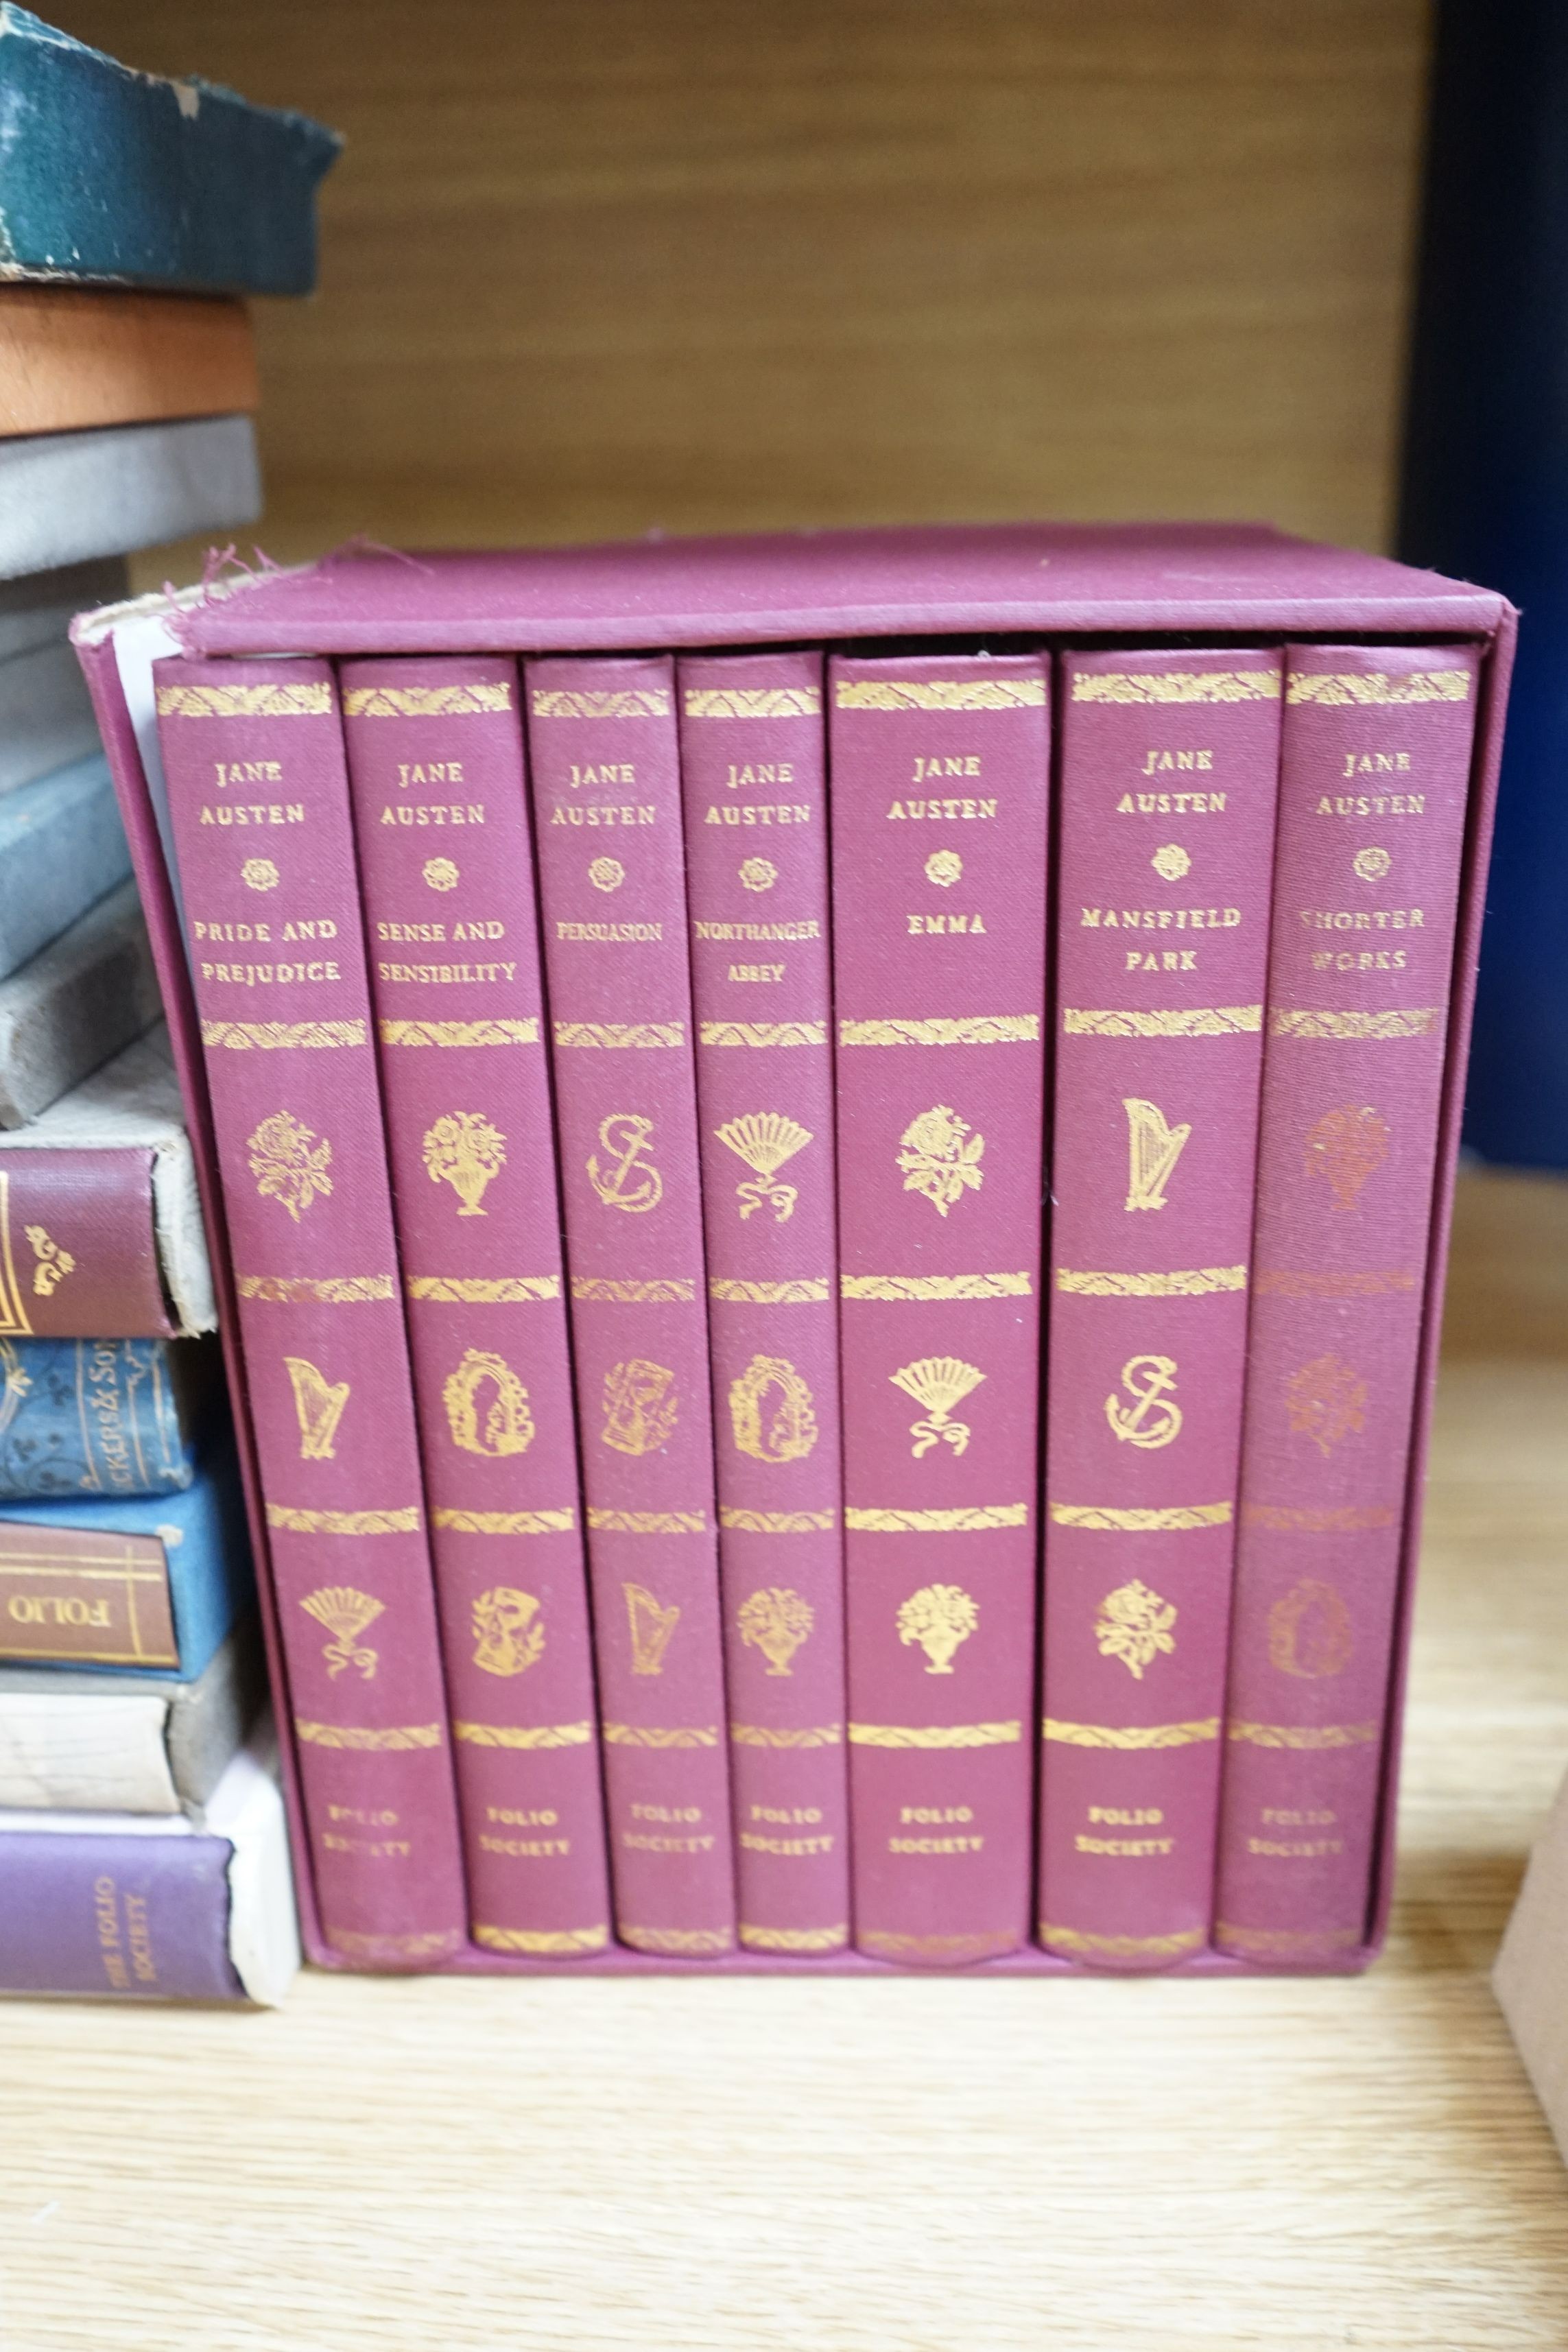 Miscellaneous Books - including Jane Austen, 7 vols. Folio Society boxed set (1975, illus. Joan Hassall); 15 other Folio Society vols., and others to include British War Relief Cookery Book (Philippines, 1941), 43 books